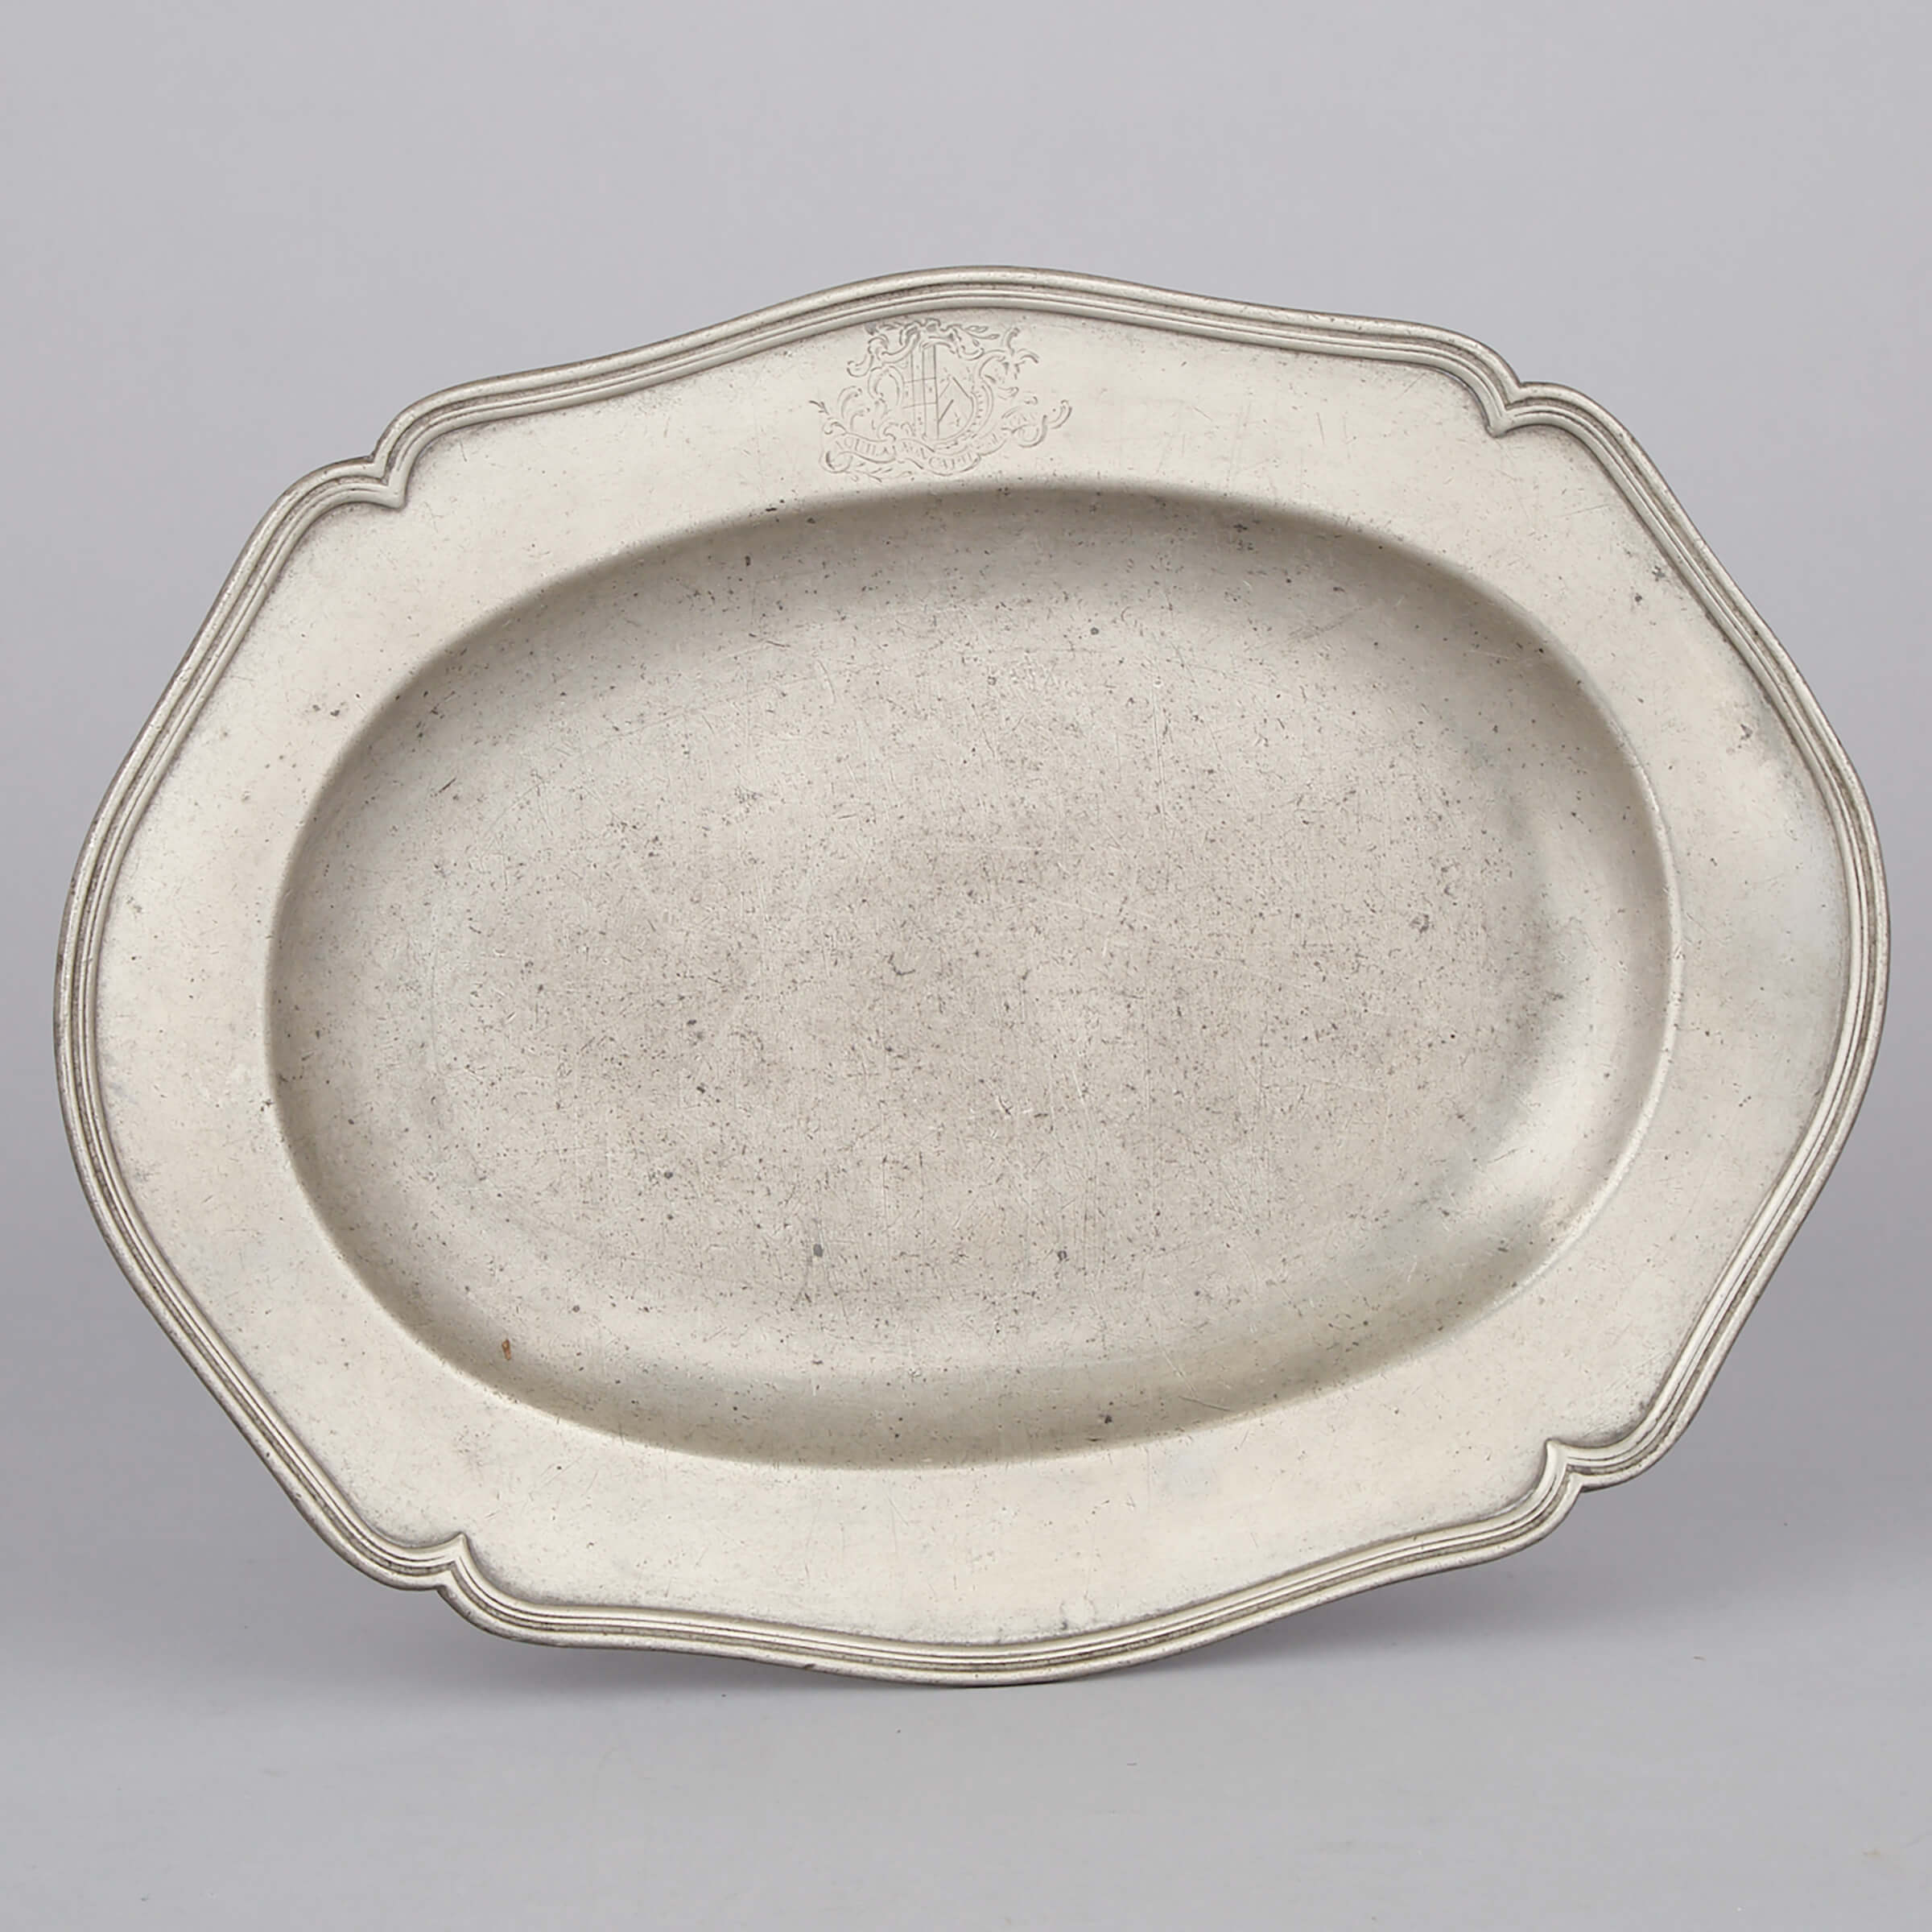 English Pewter Wavy Edge Oval Dish, Burford and Green, London, mid 18th century